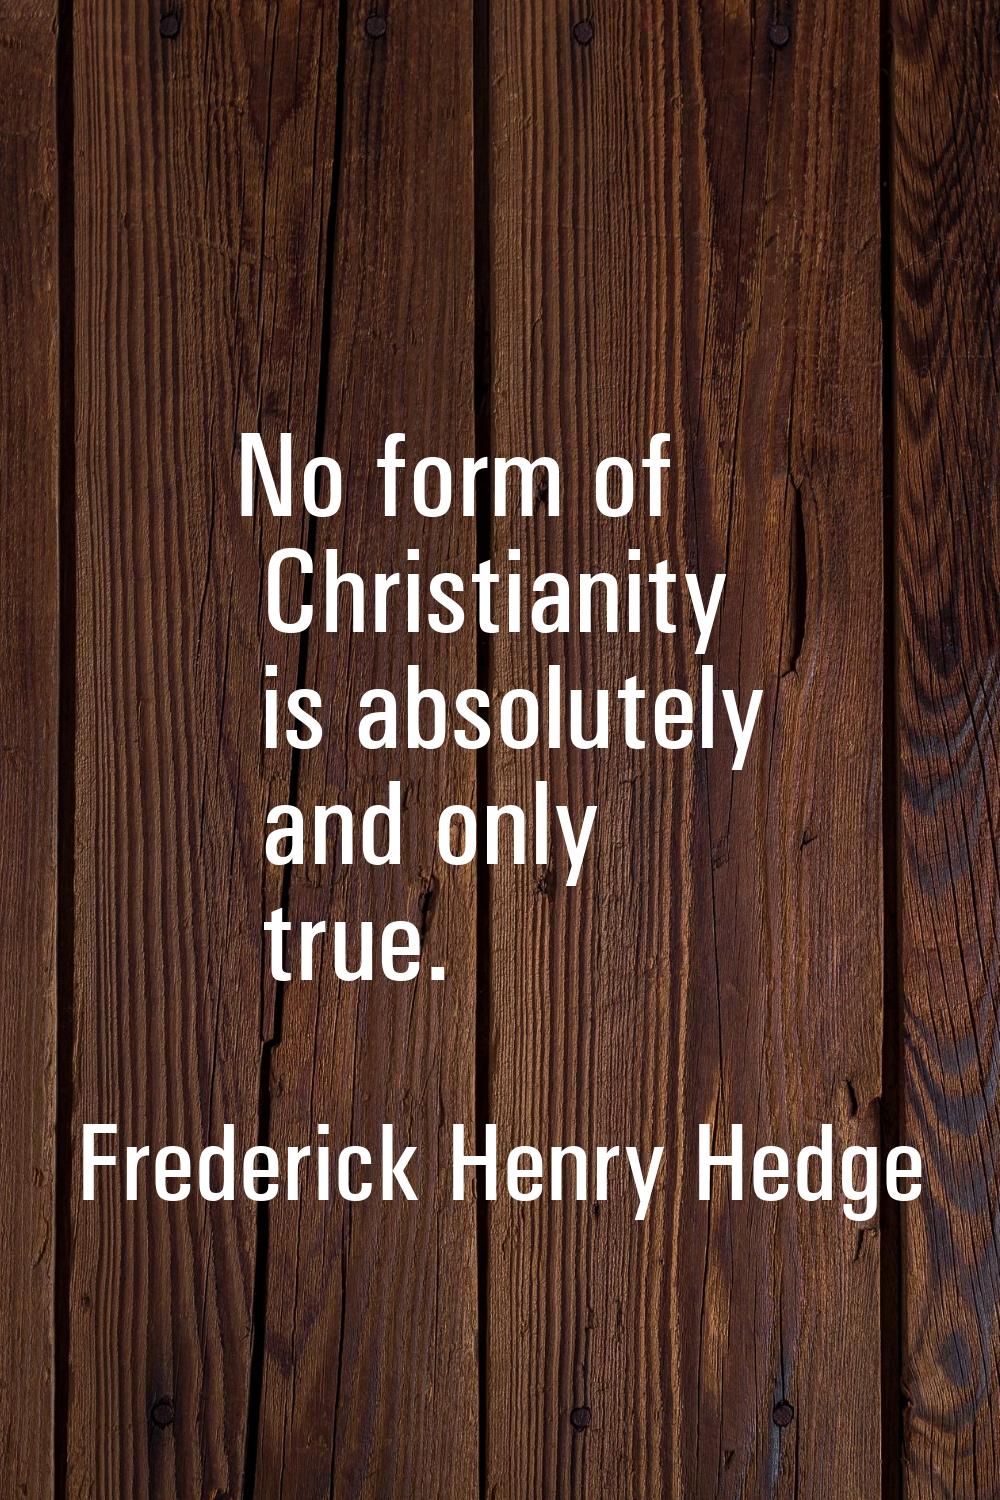 No form of Christianity is absolutely and only true.